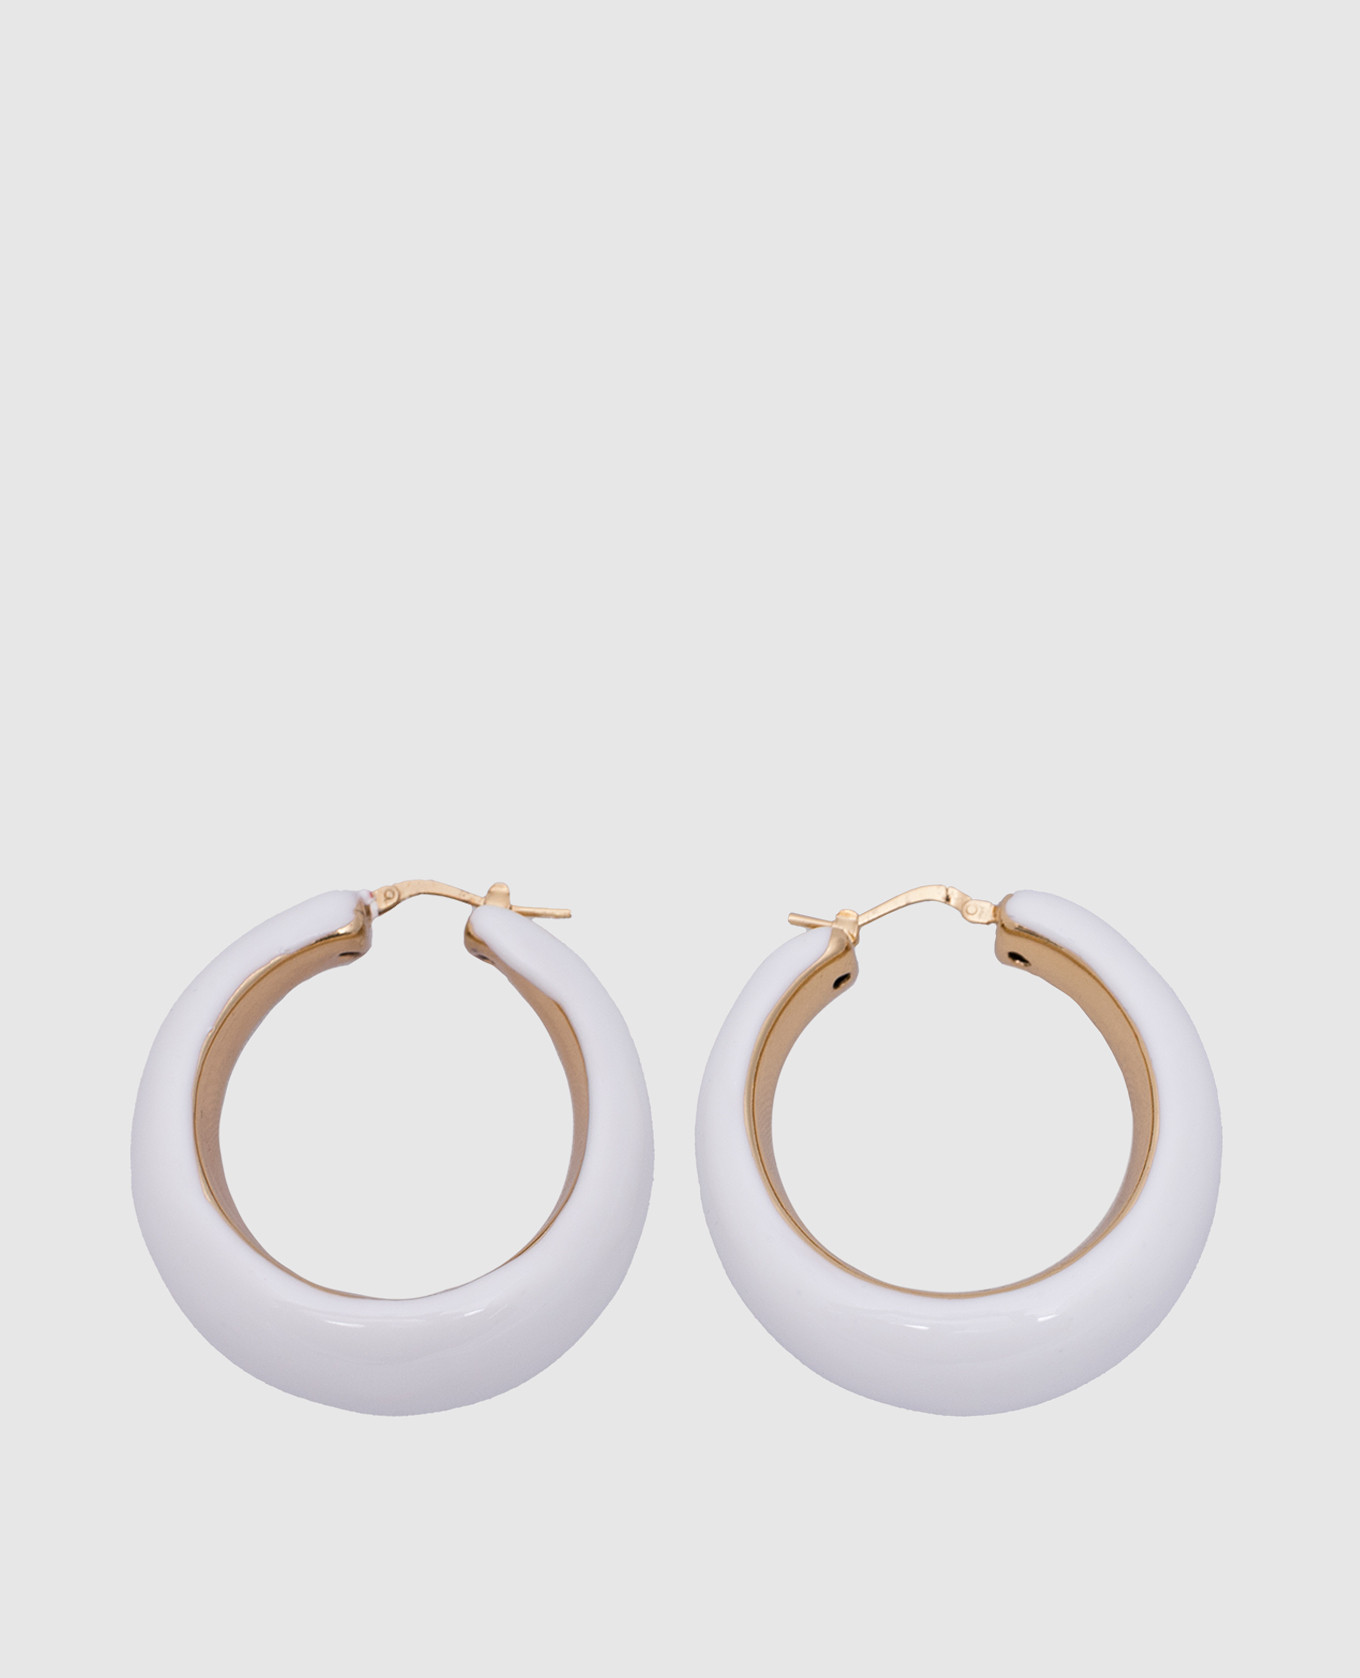 Colette white Congo earrings with 24k gold plating